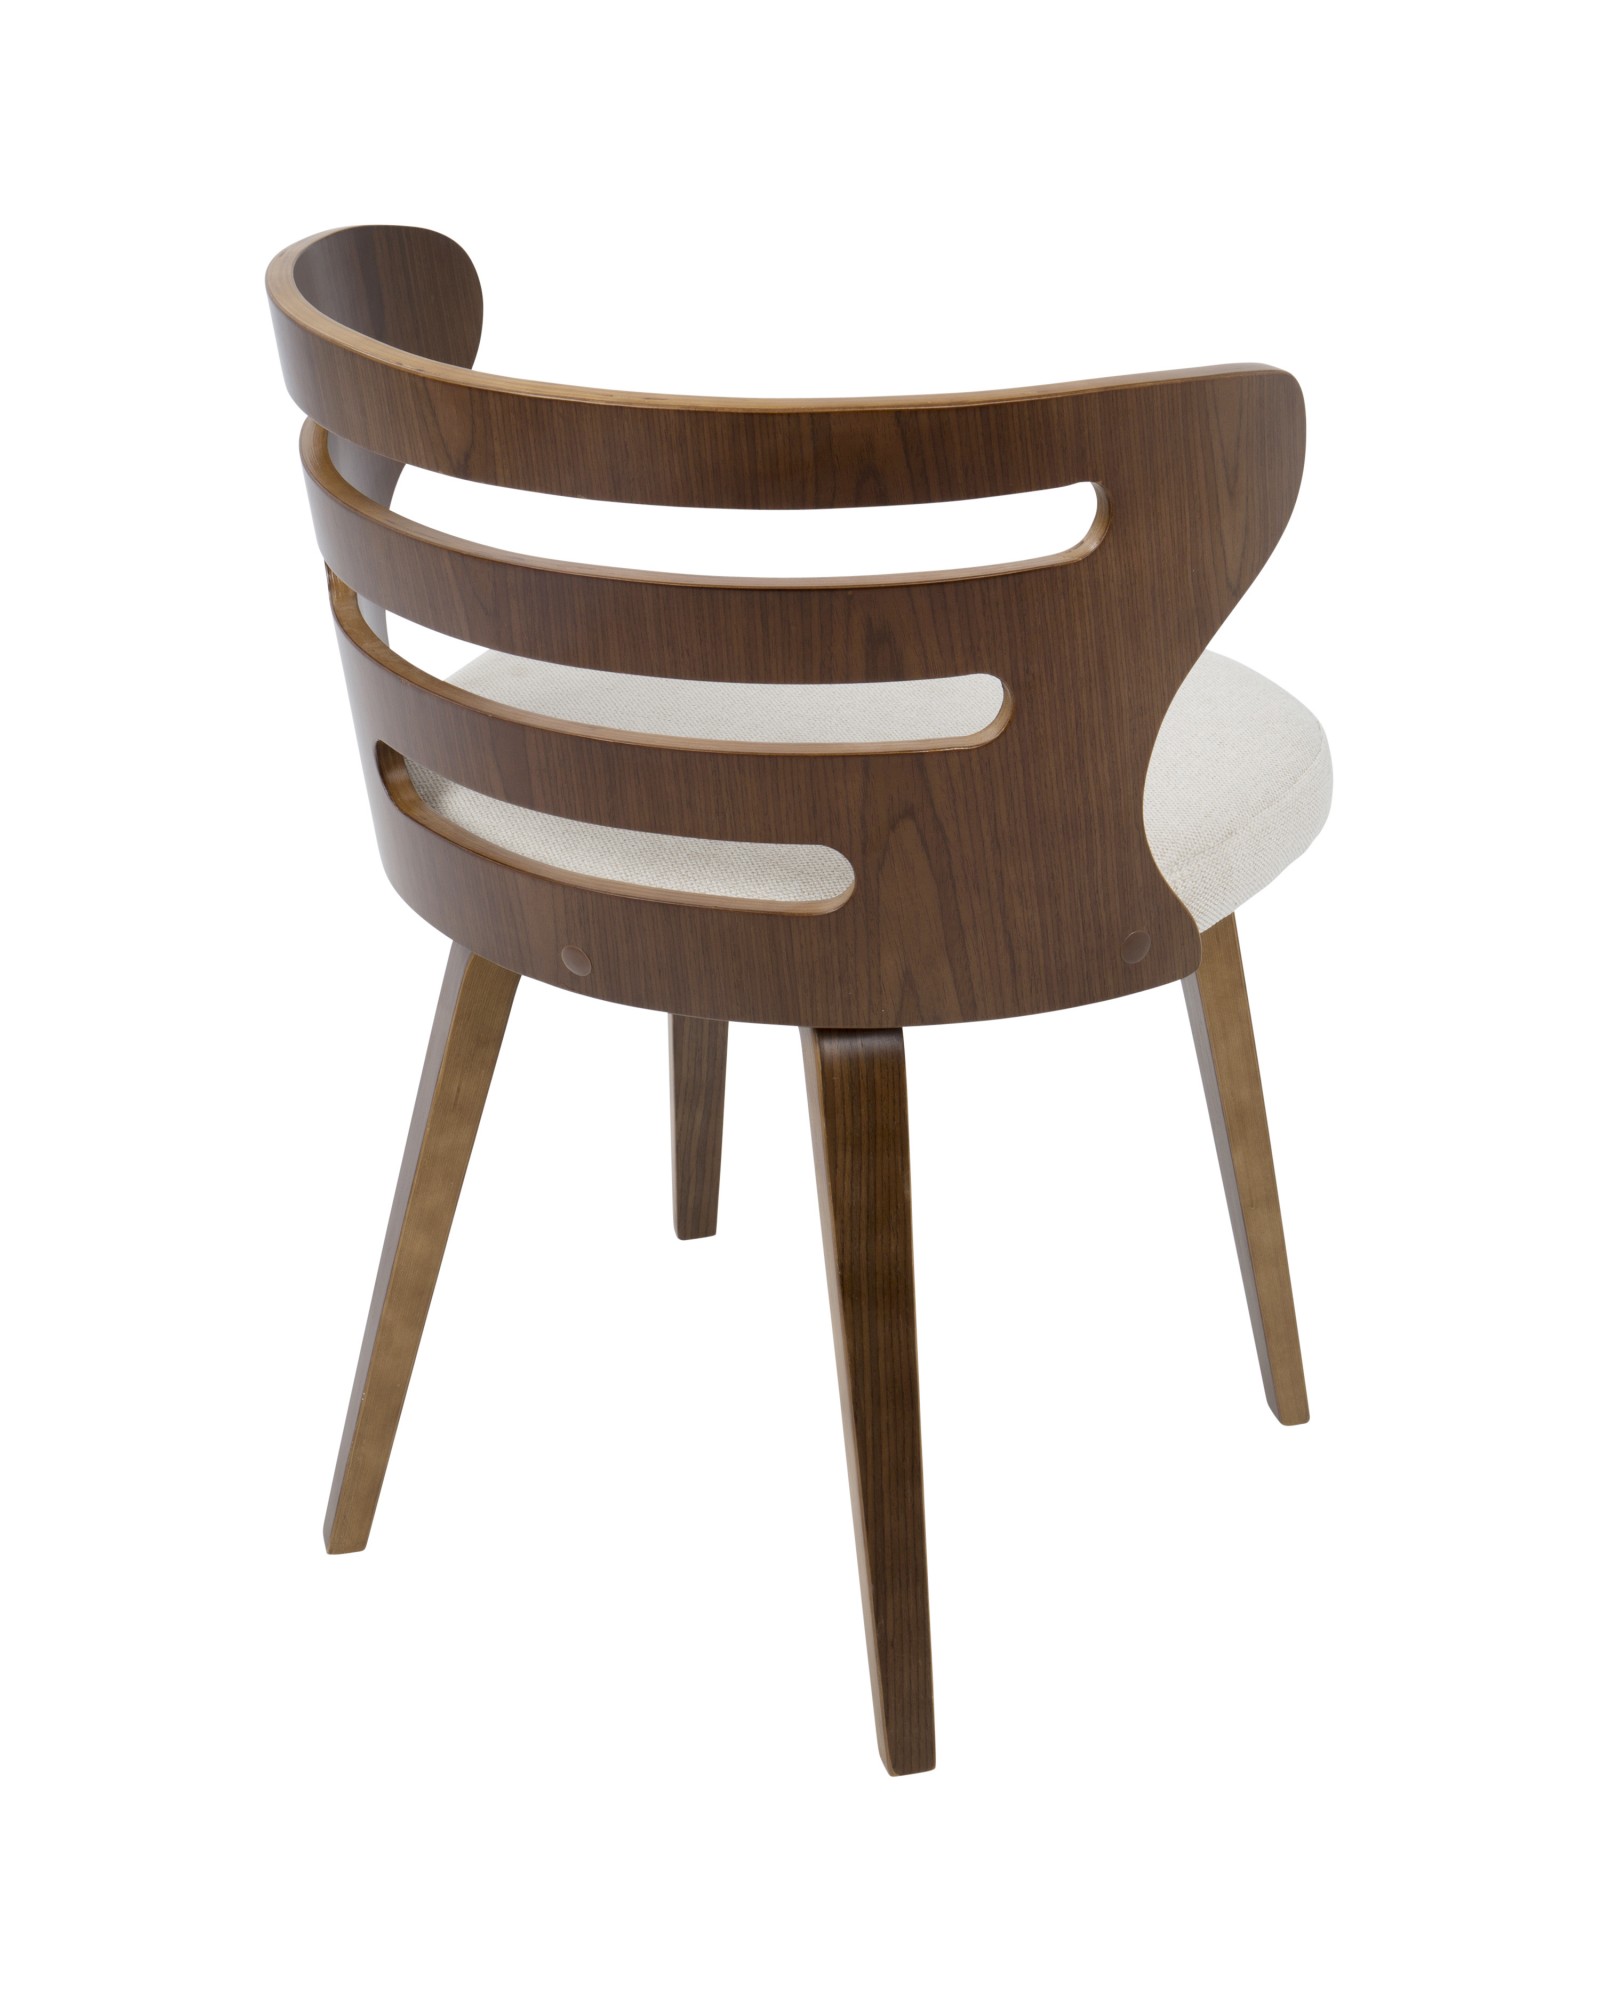 Cosi Mid-Century Modern Dining/Accent Chair in Walnut and Cream Fabric